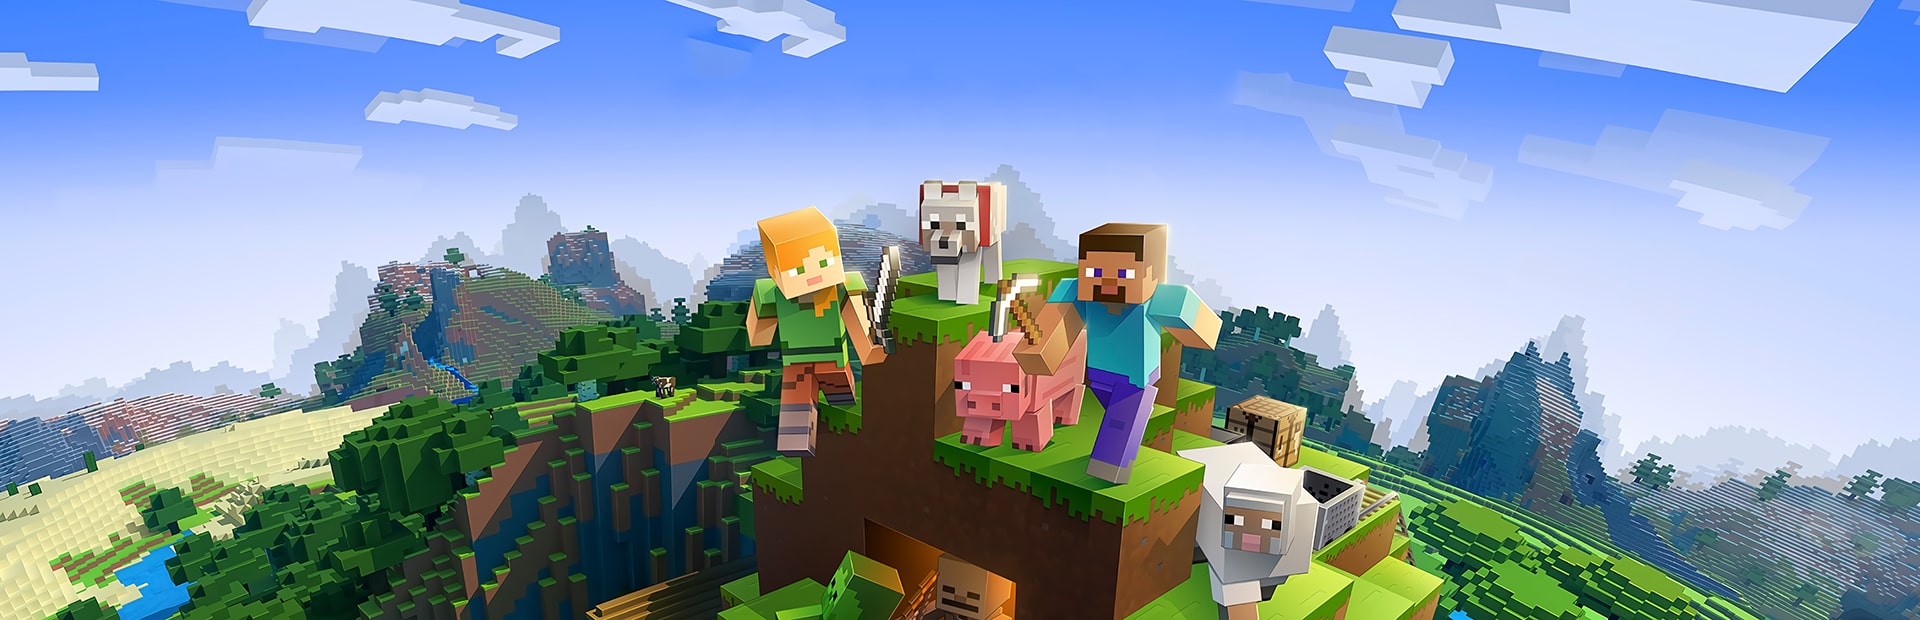 Minecraft - An Online Action Game With a Twist For the Nintendo Switch